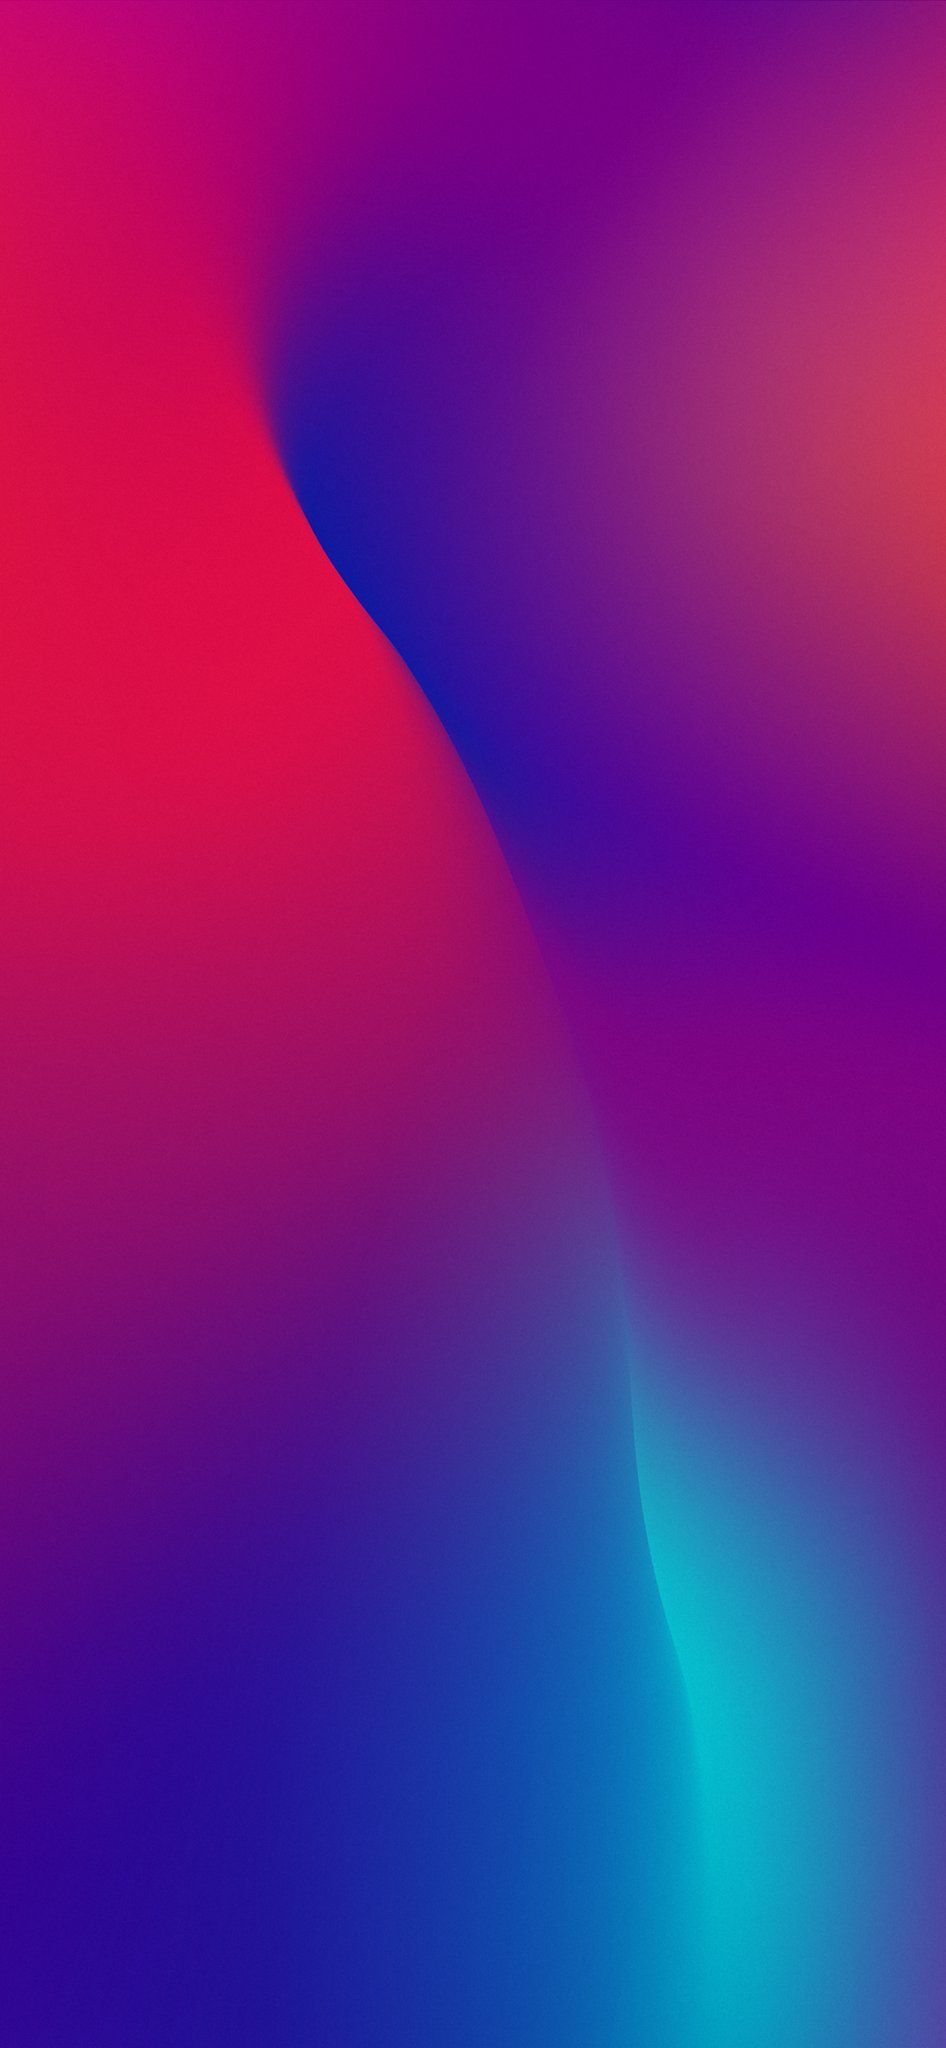 Apple iPhone XR Wallpapers on WallpaperDog